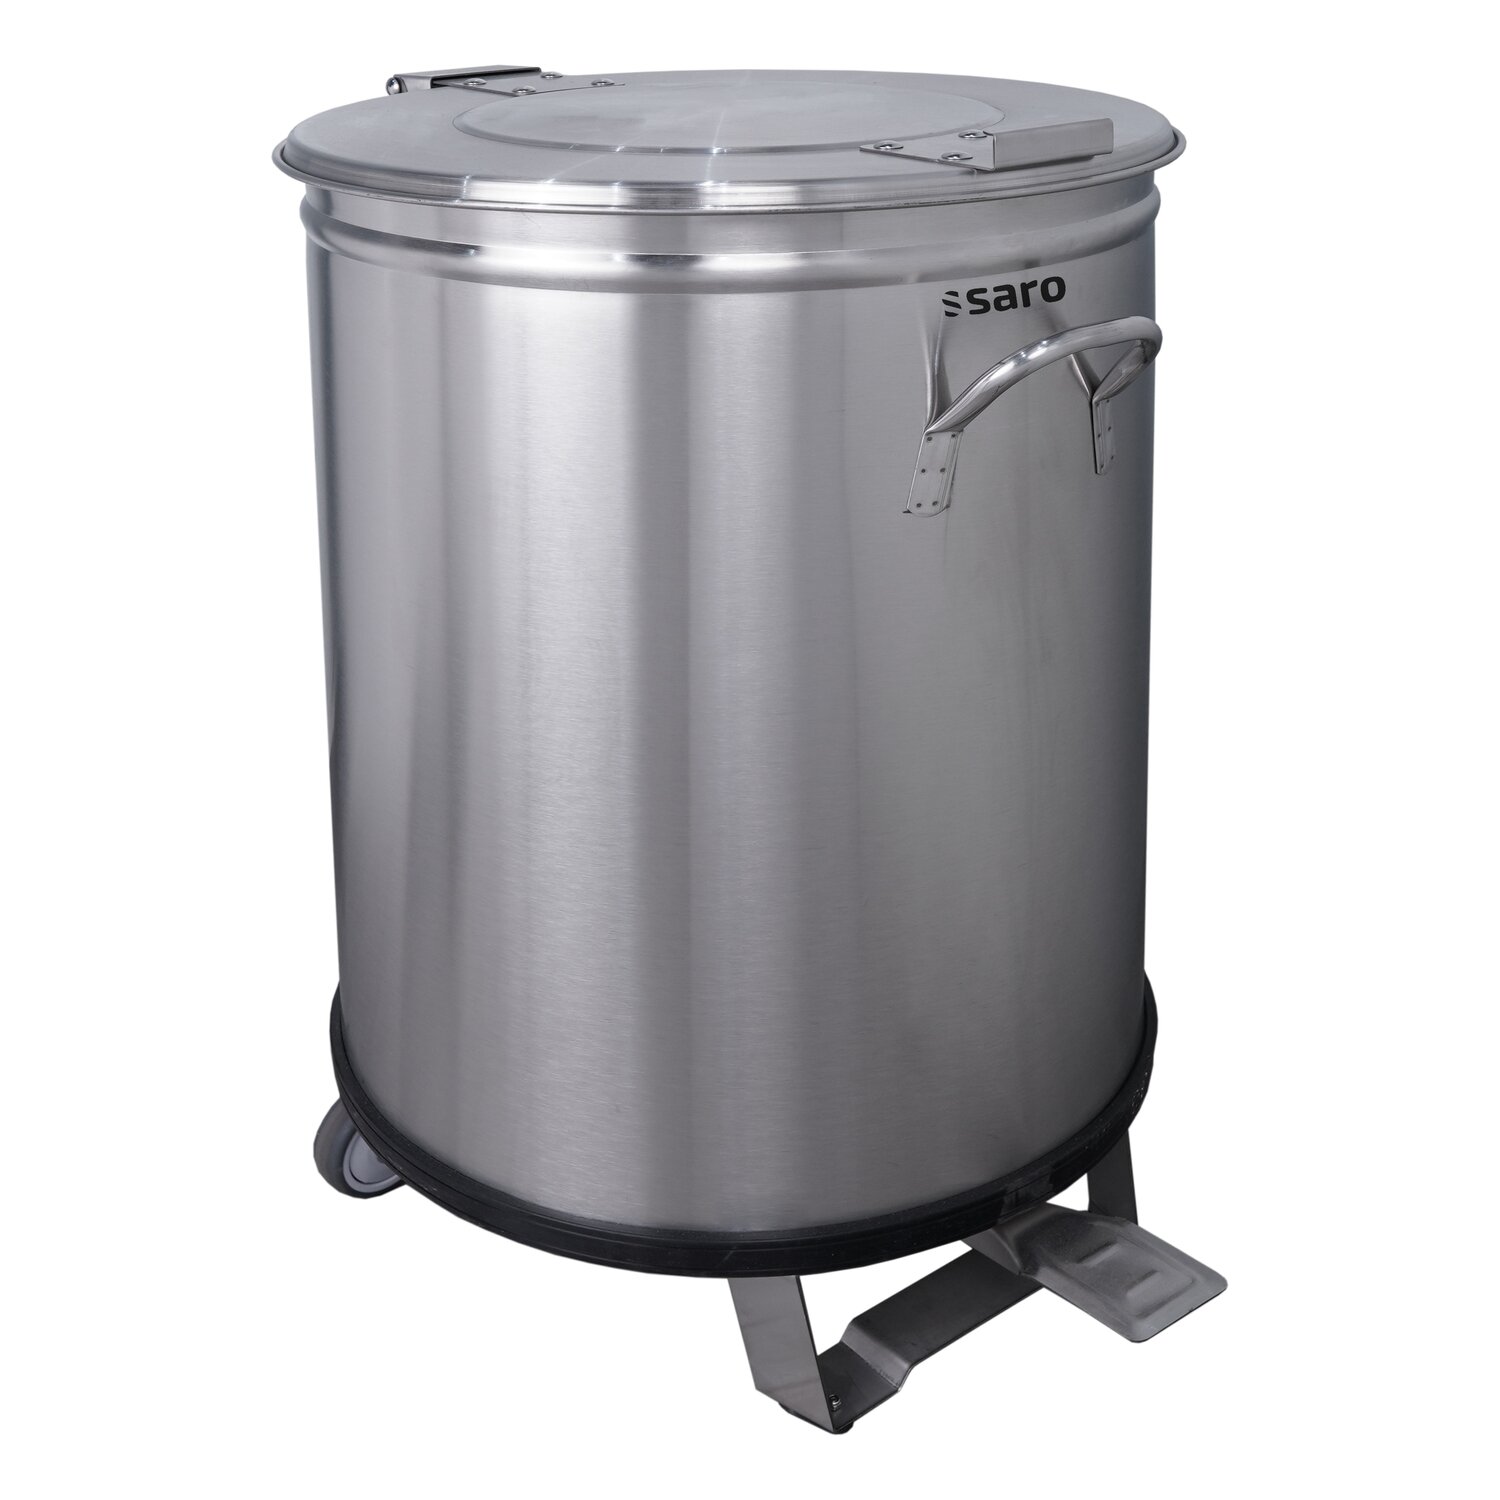 SARO Dustbin with pedal and softclose lid model MPS 50